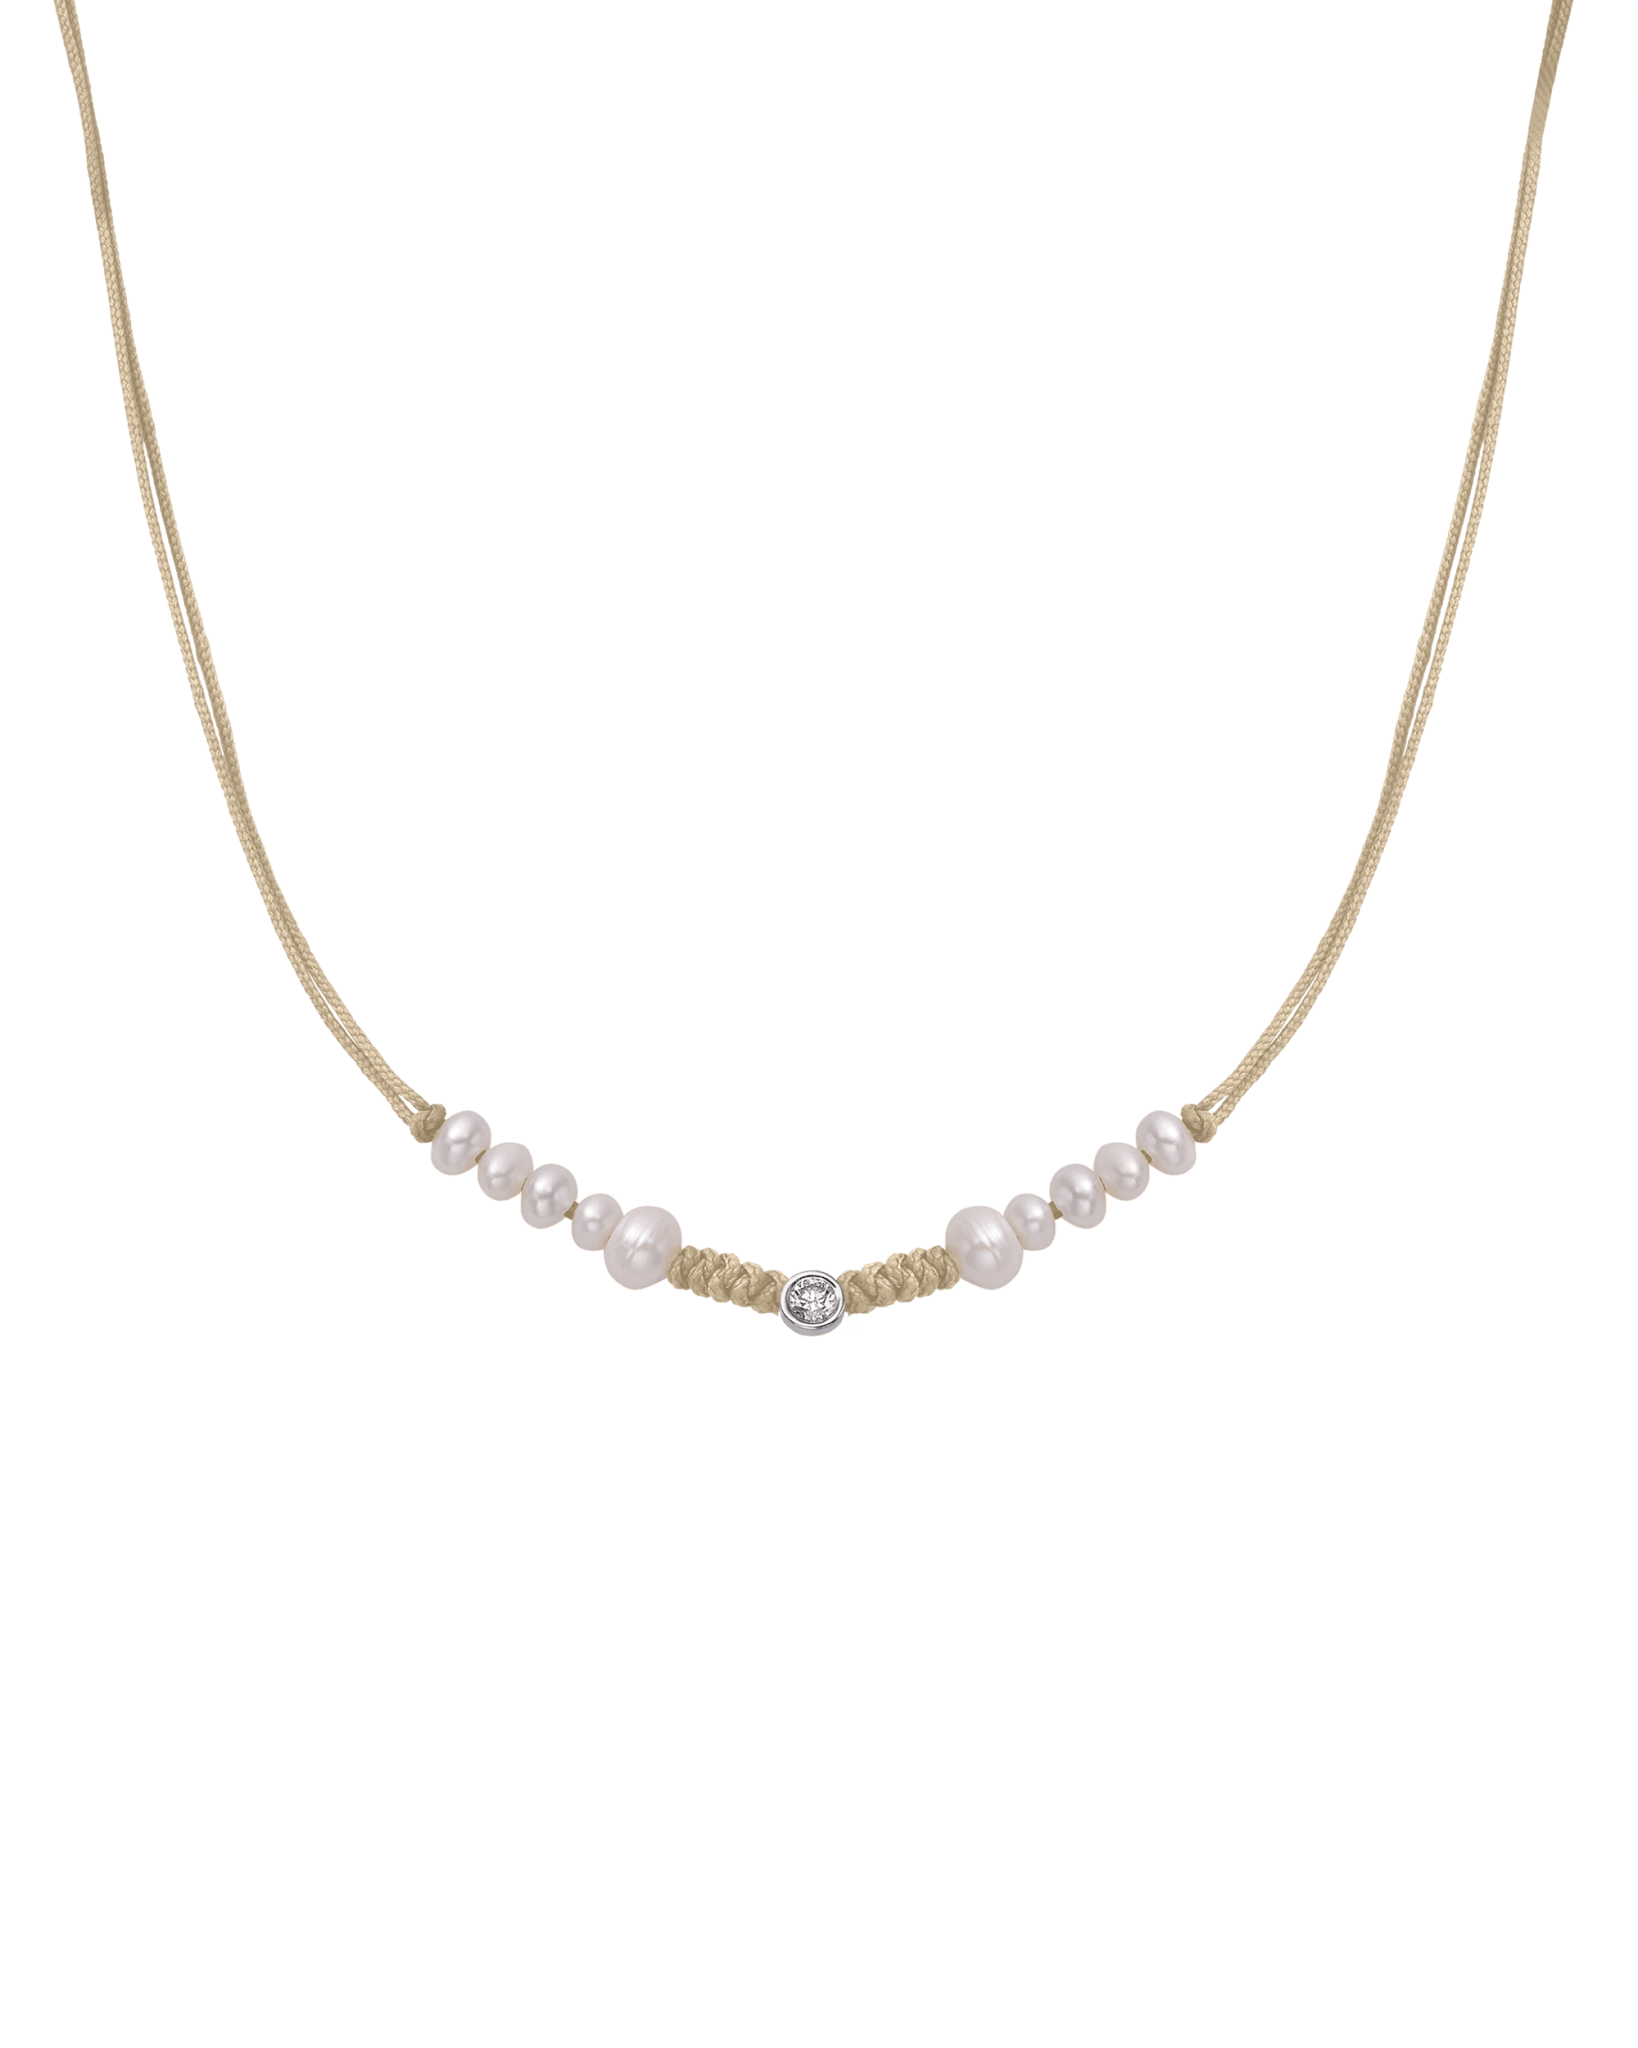 Ten Natural Pearl String of Love Necklace - 14K White Gold Necklaces 14K Solid Gold Beige Large: 0.1ct 